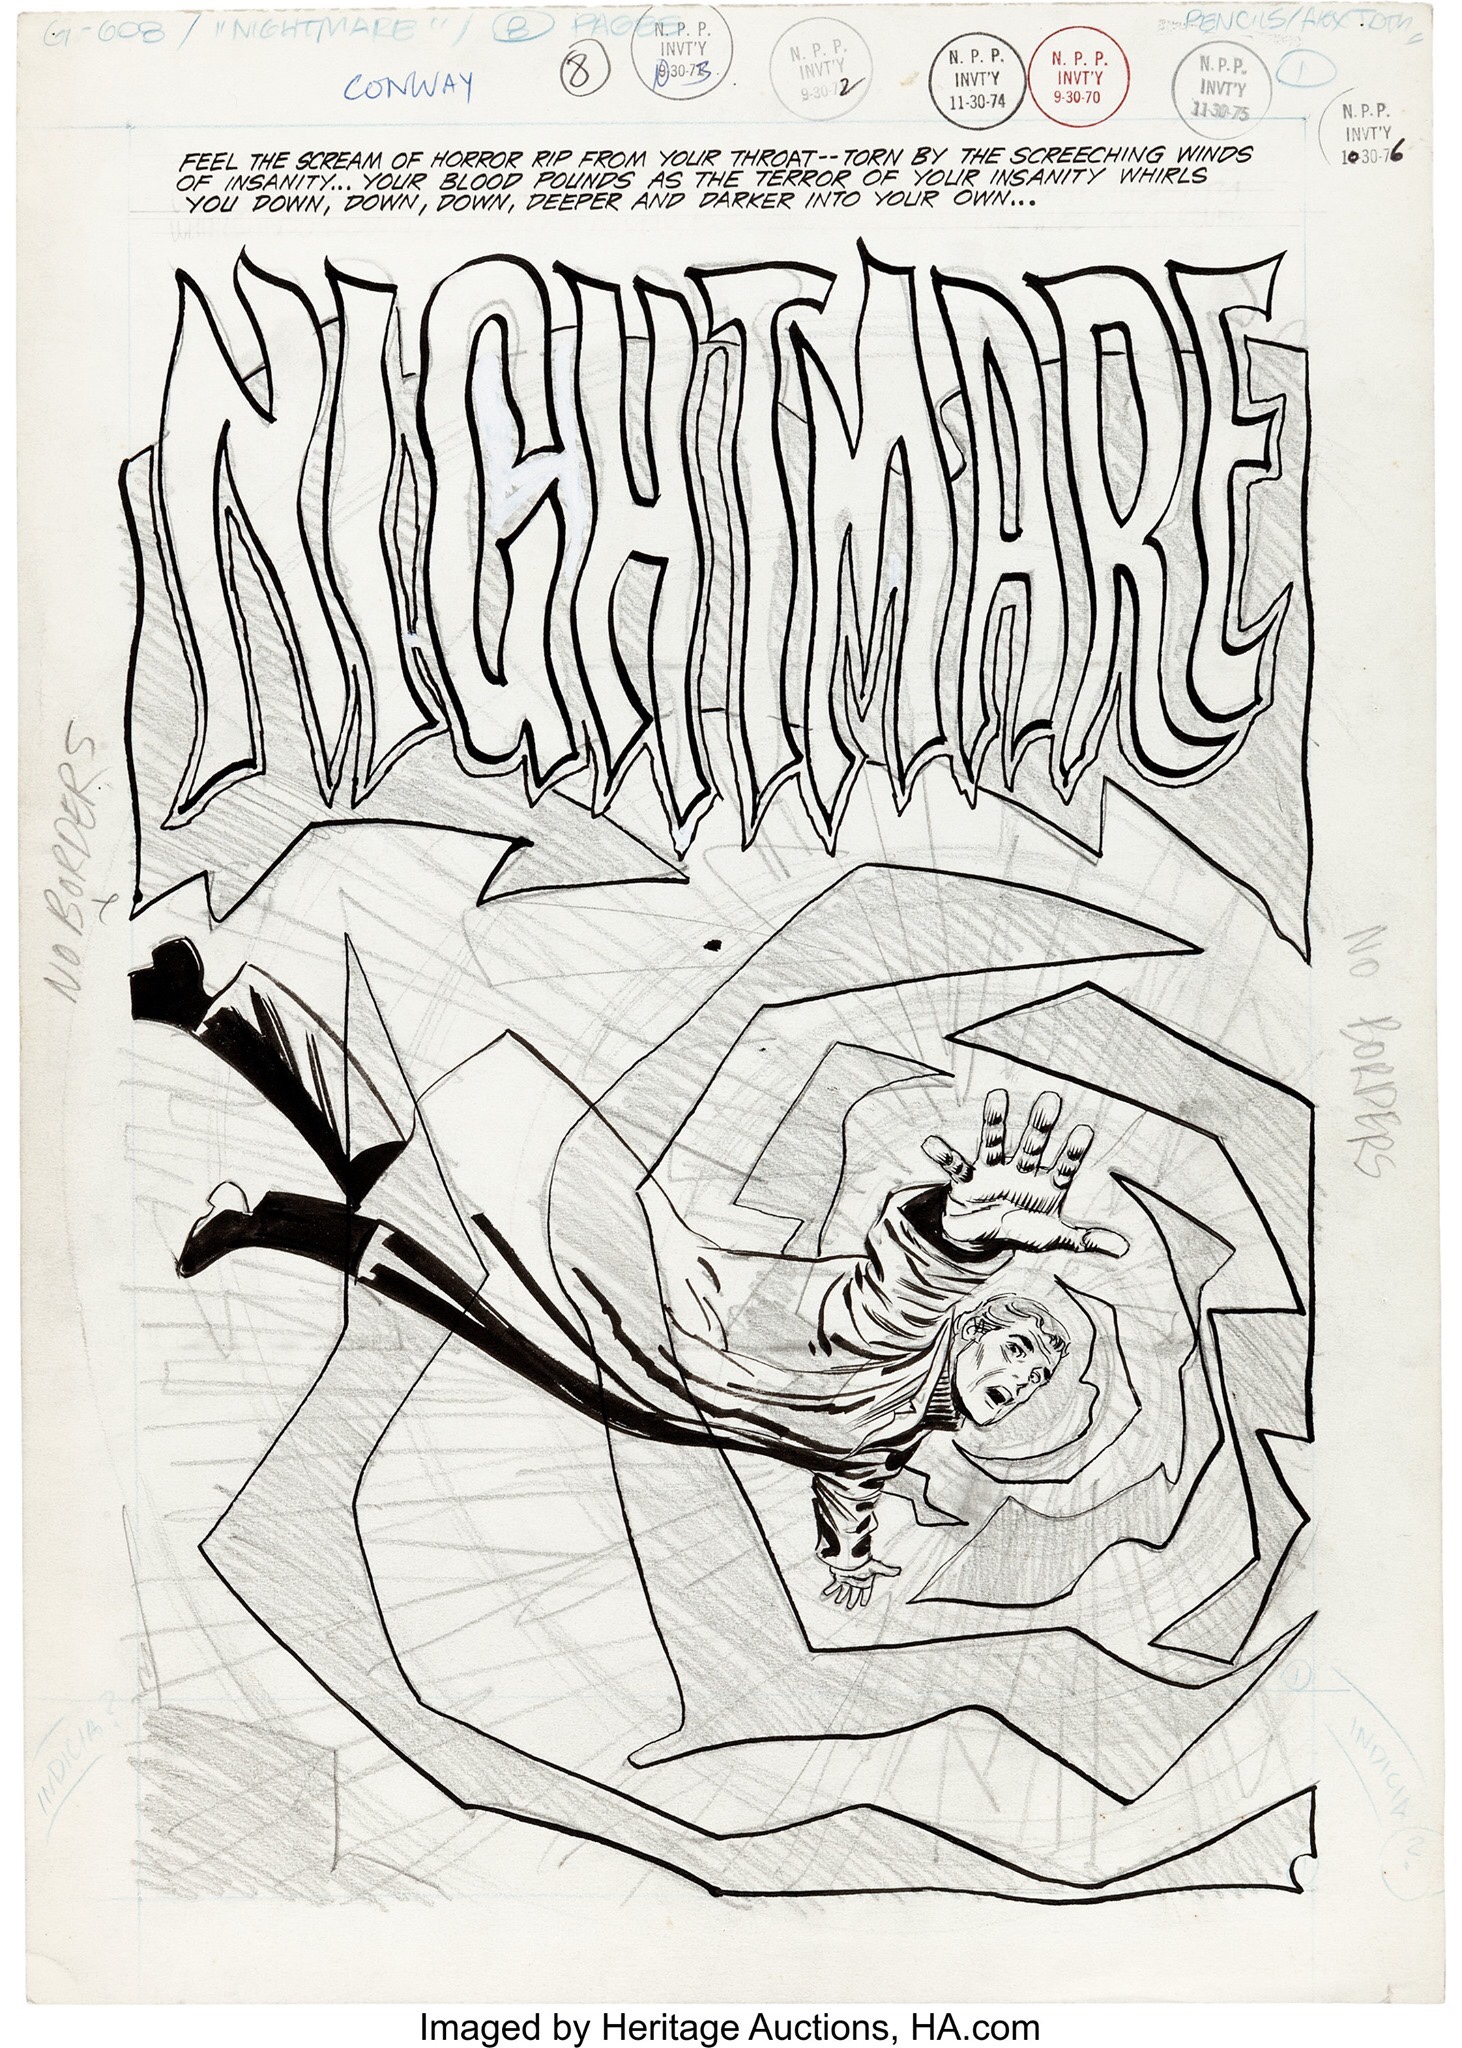 “Nightmare “ by Alex Toth, for DC Comics, 1970. Unpublished 